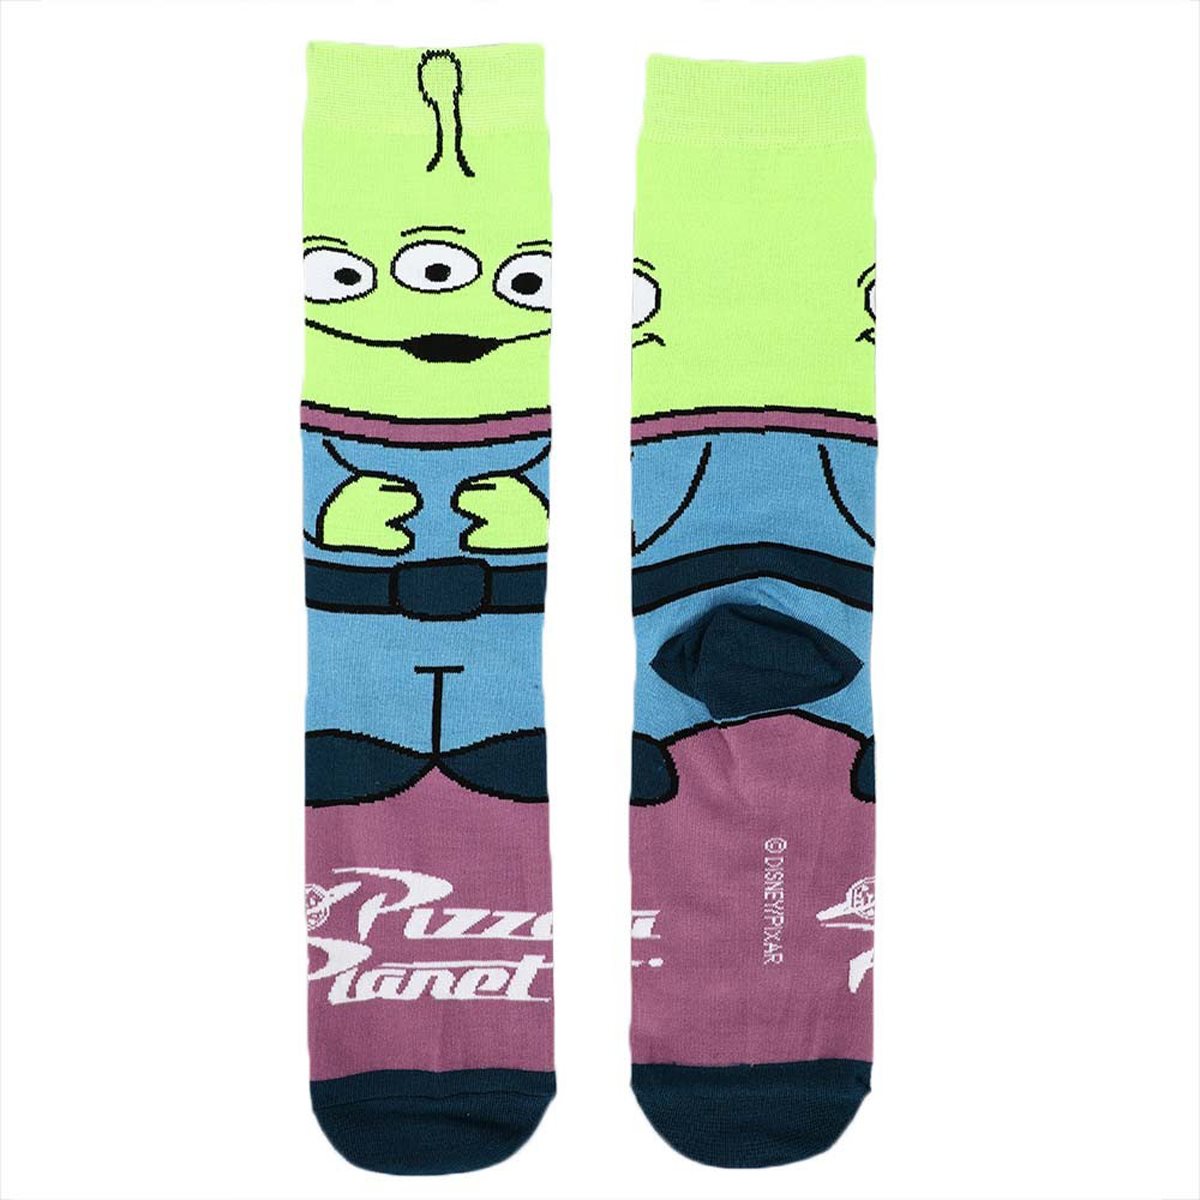 Toy Story Alien Character Socks - Entertainment Earth